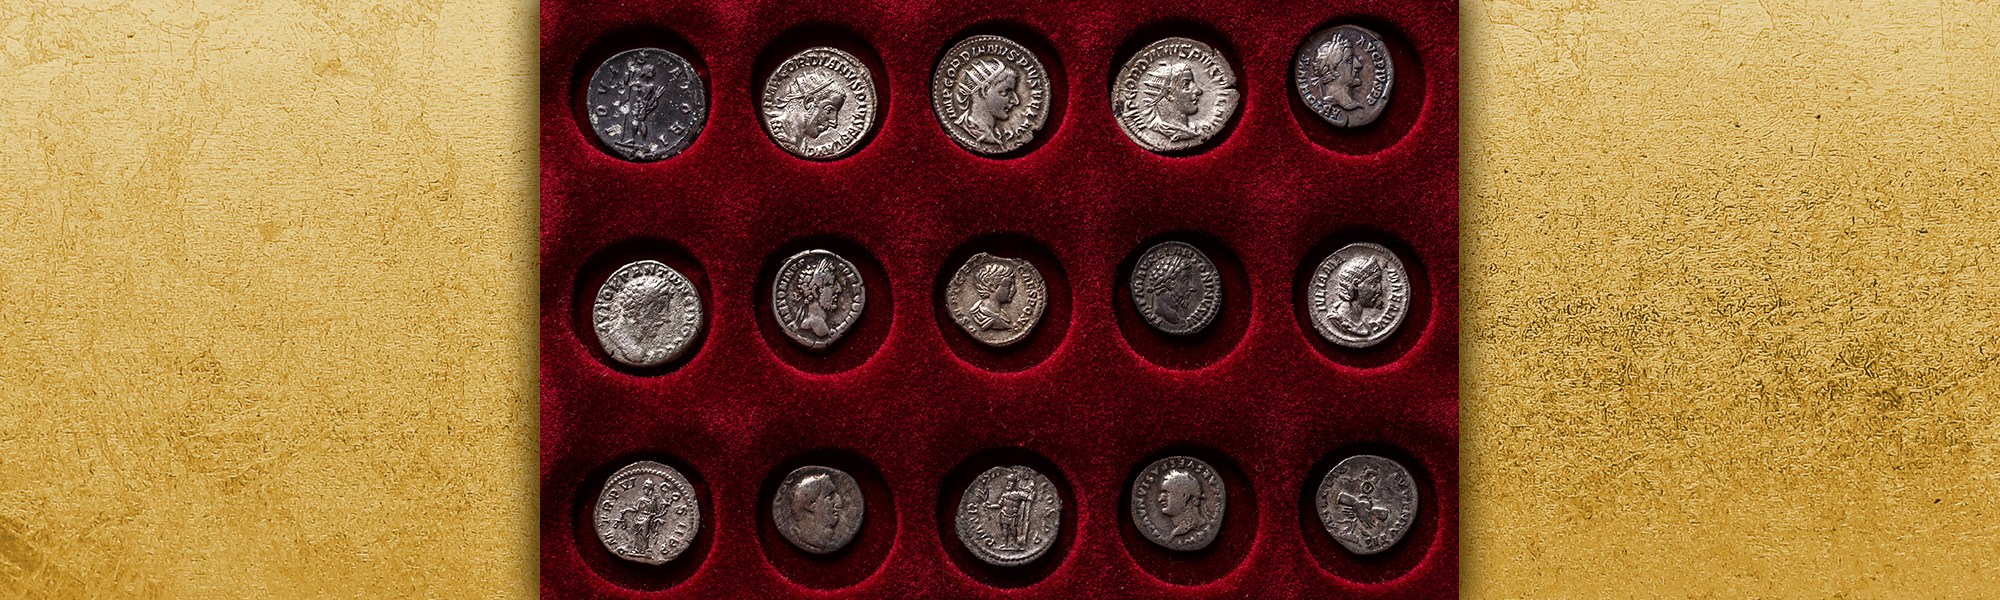 Is Collecting Coins a Good Hobby? The Benefits of Collecting Coins